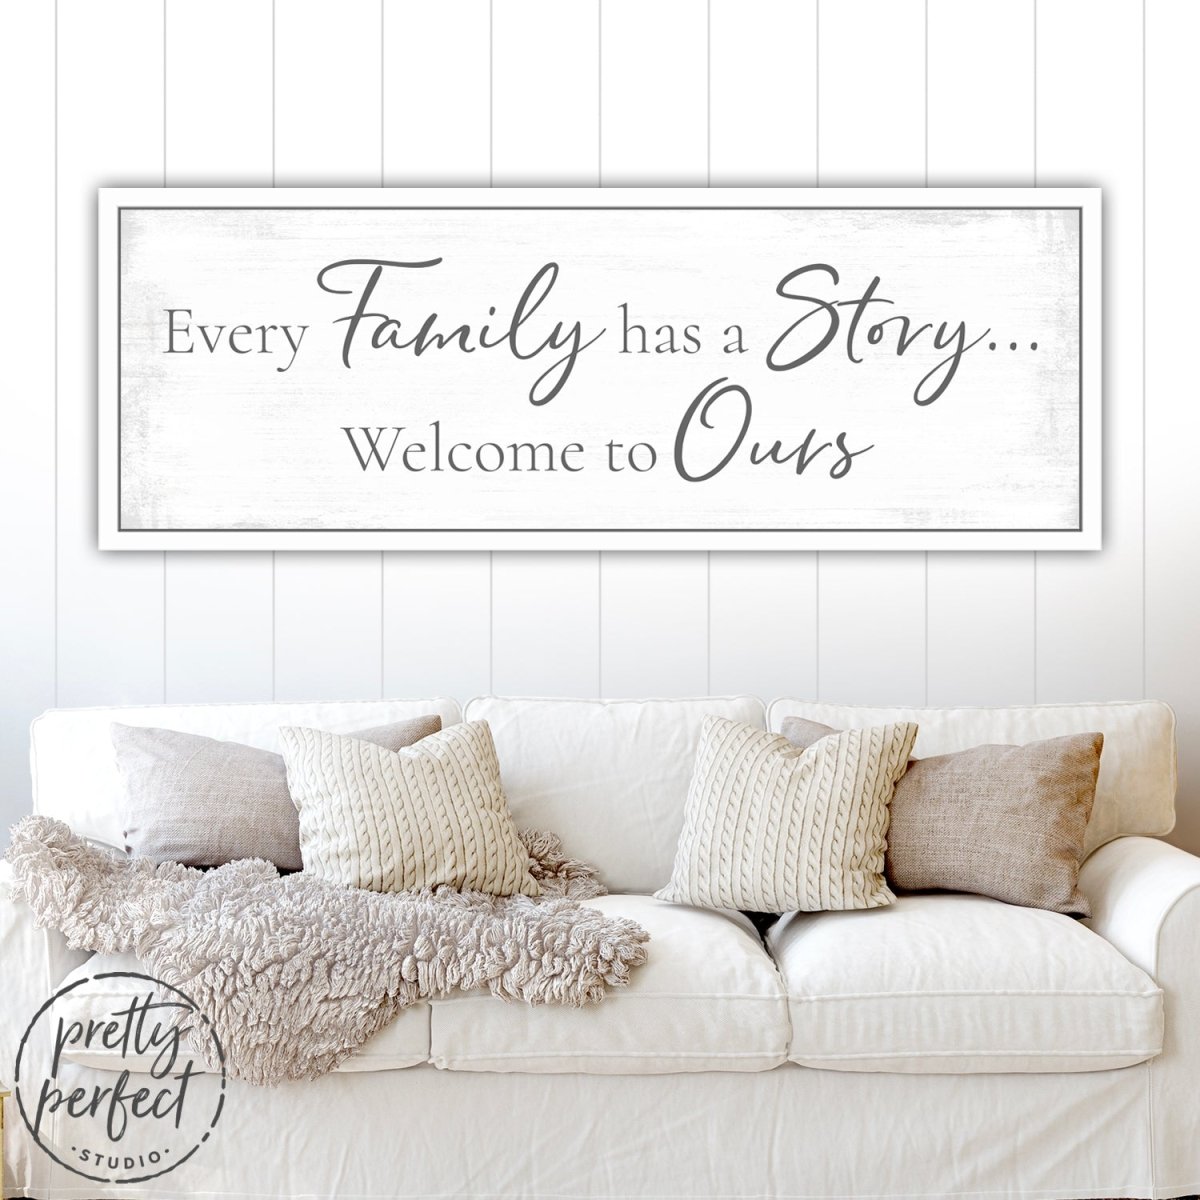 Every Family Has a Story Sign Above Couch - Pretty Perfect Studio